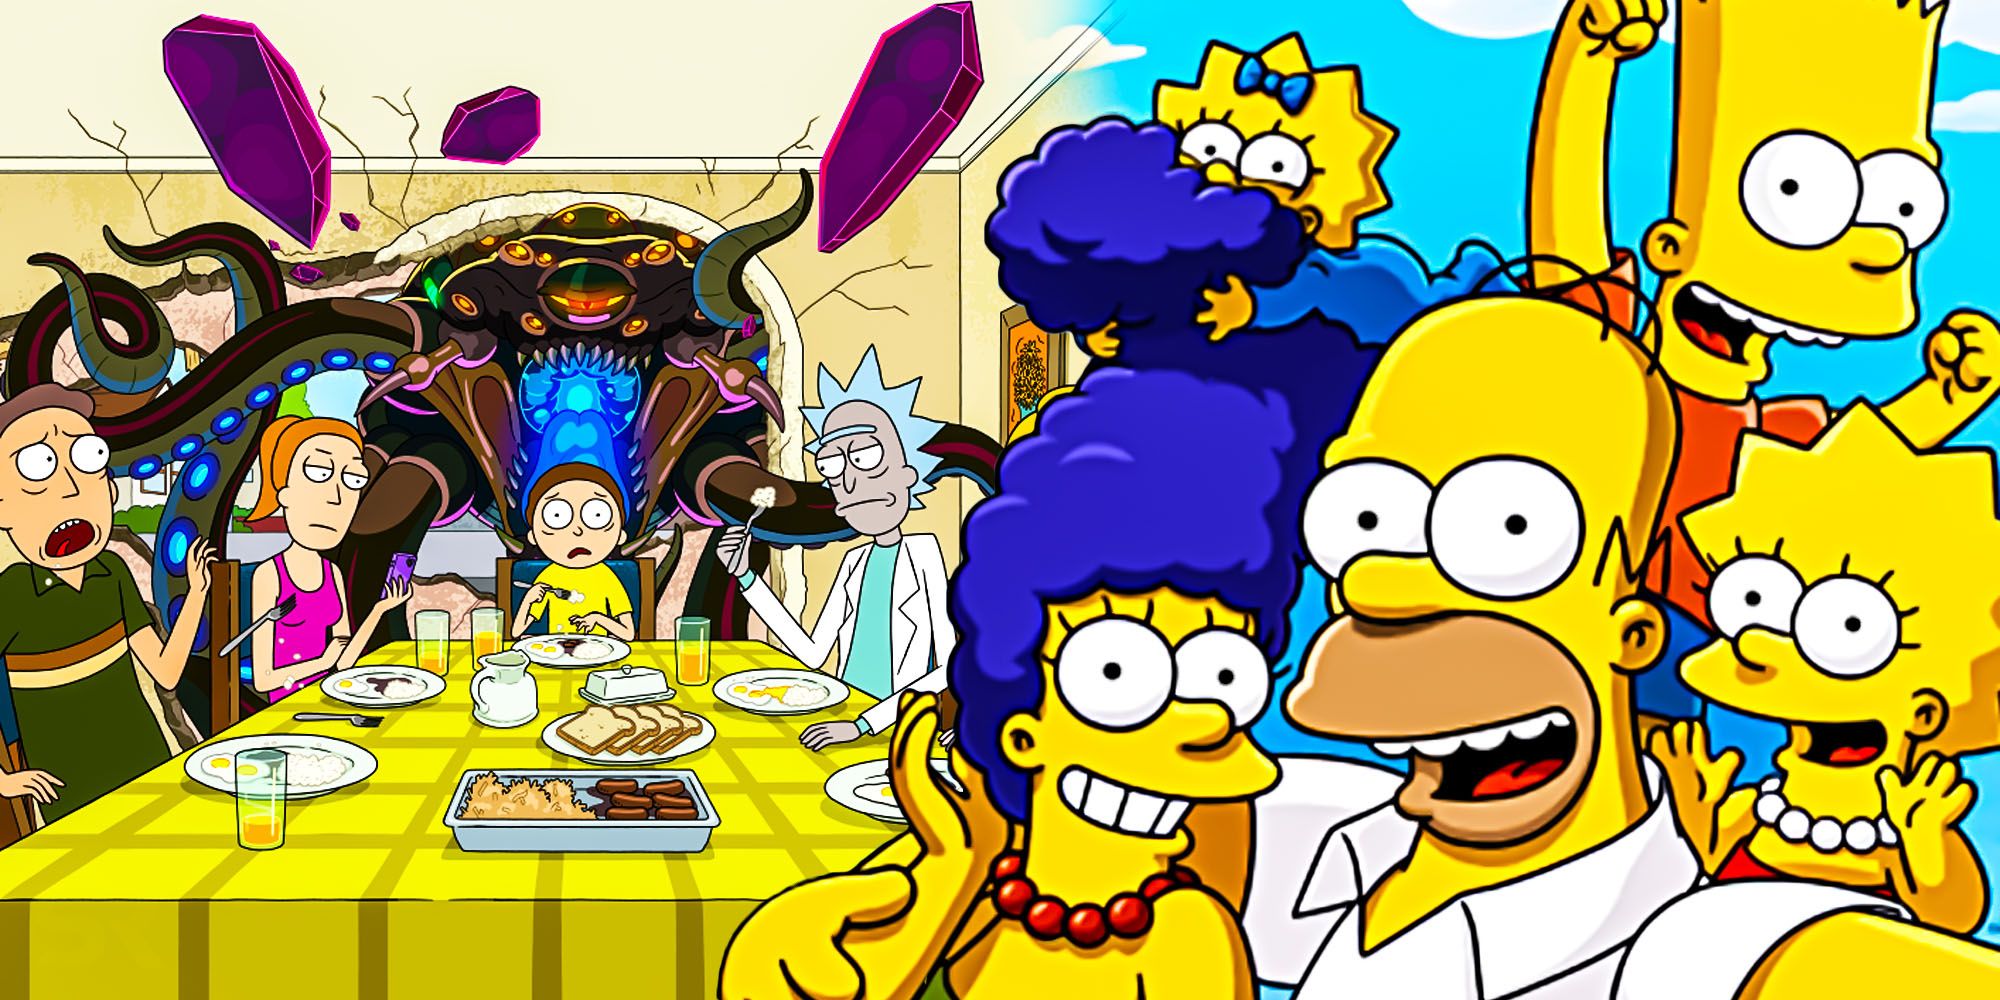 Rick and morty will avoid why old simpsons fans stopped watching